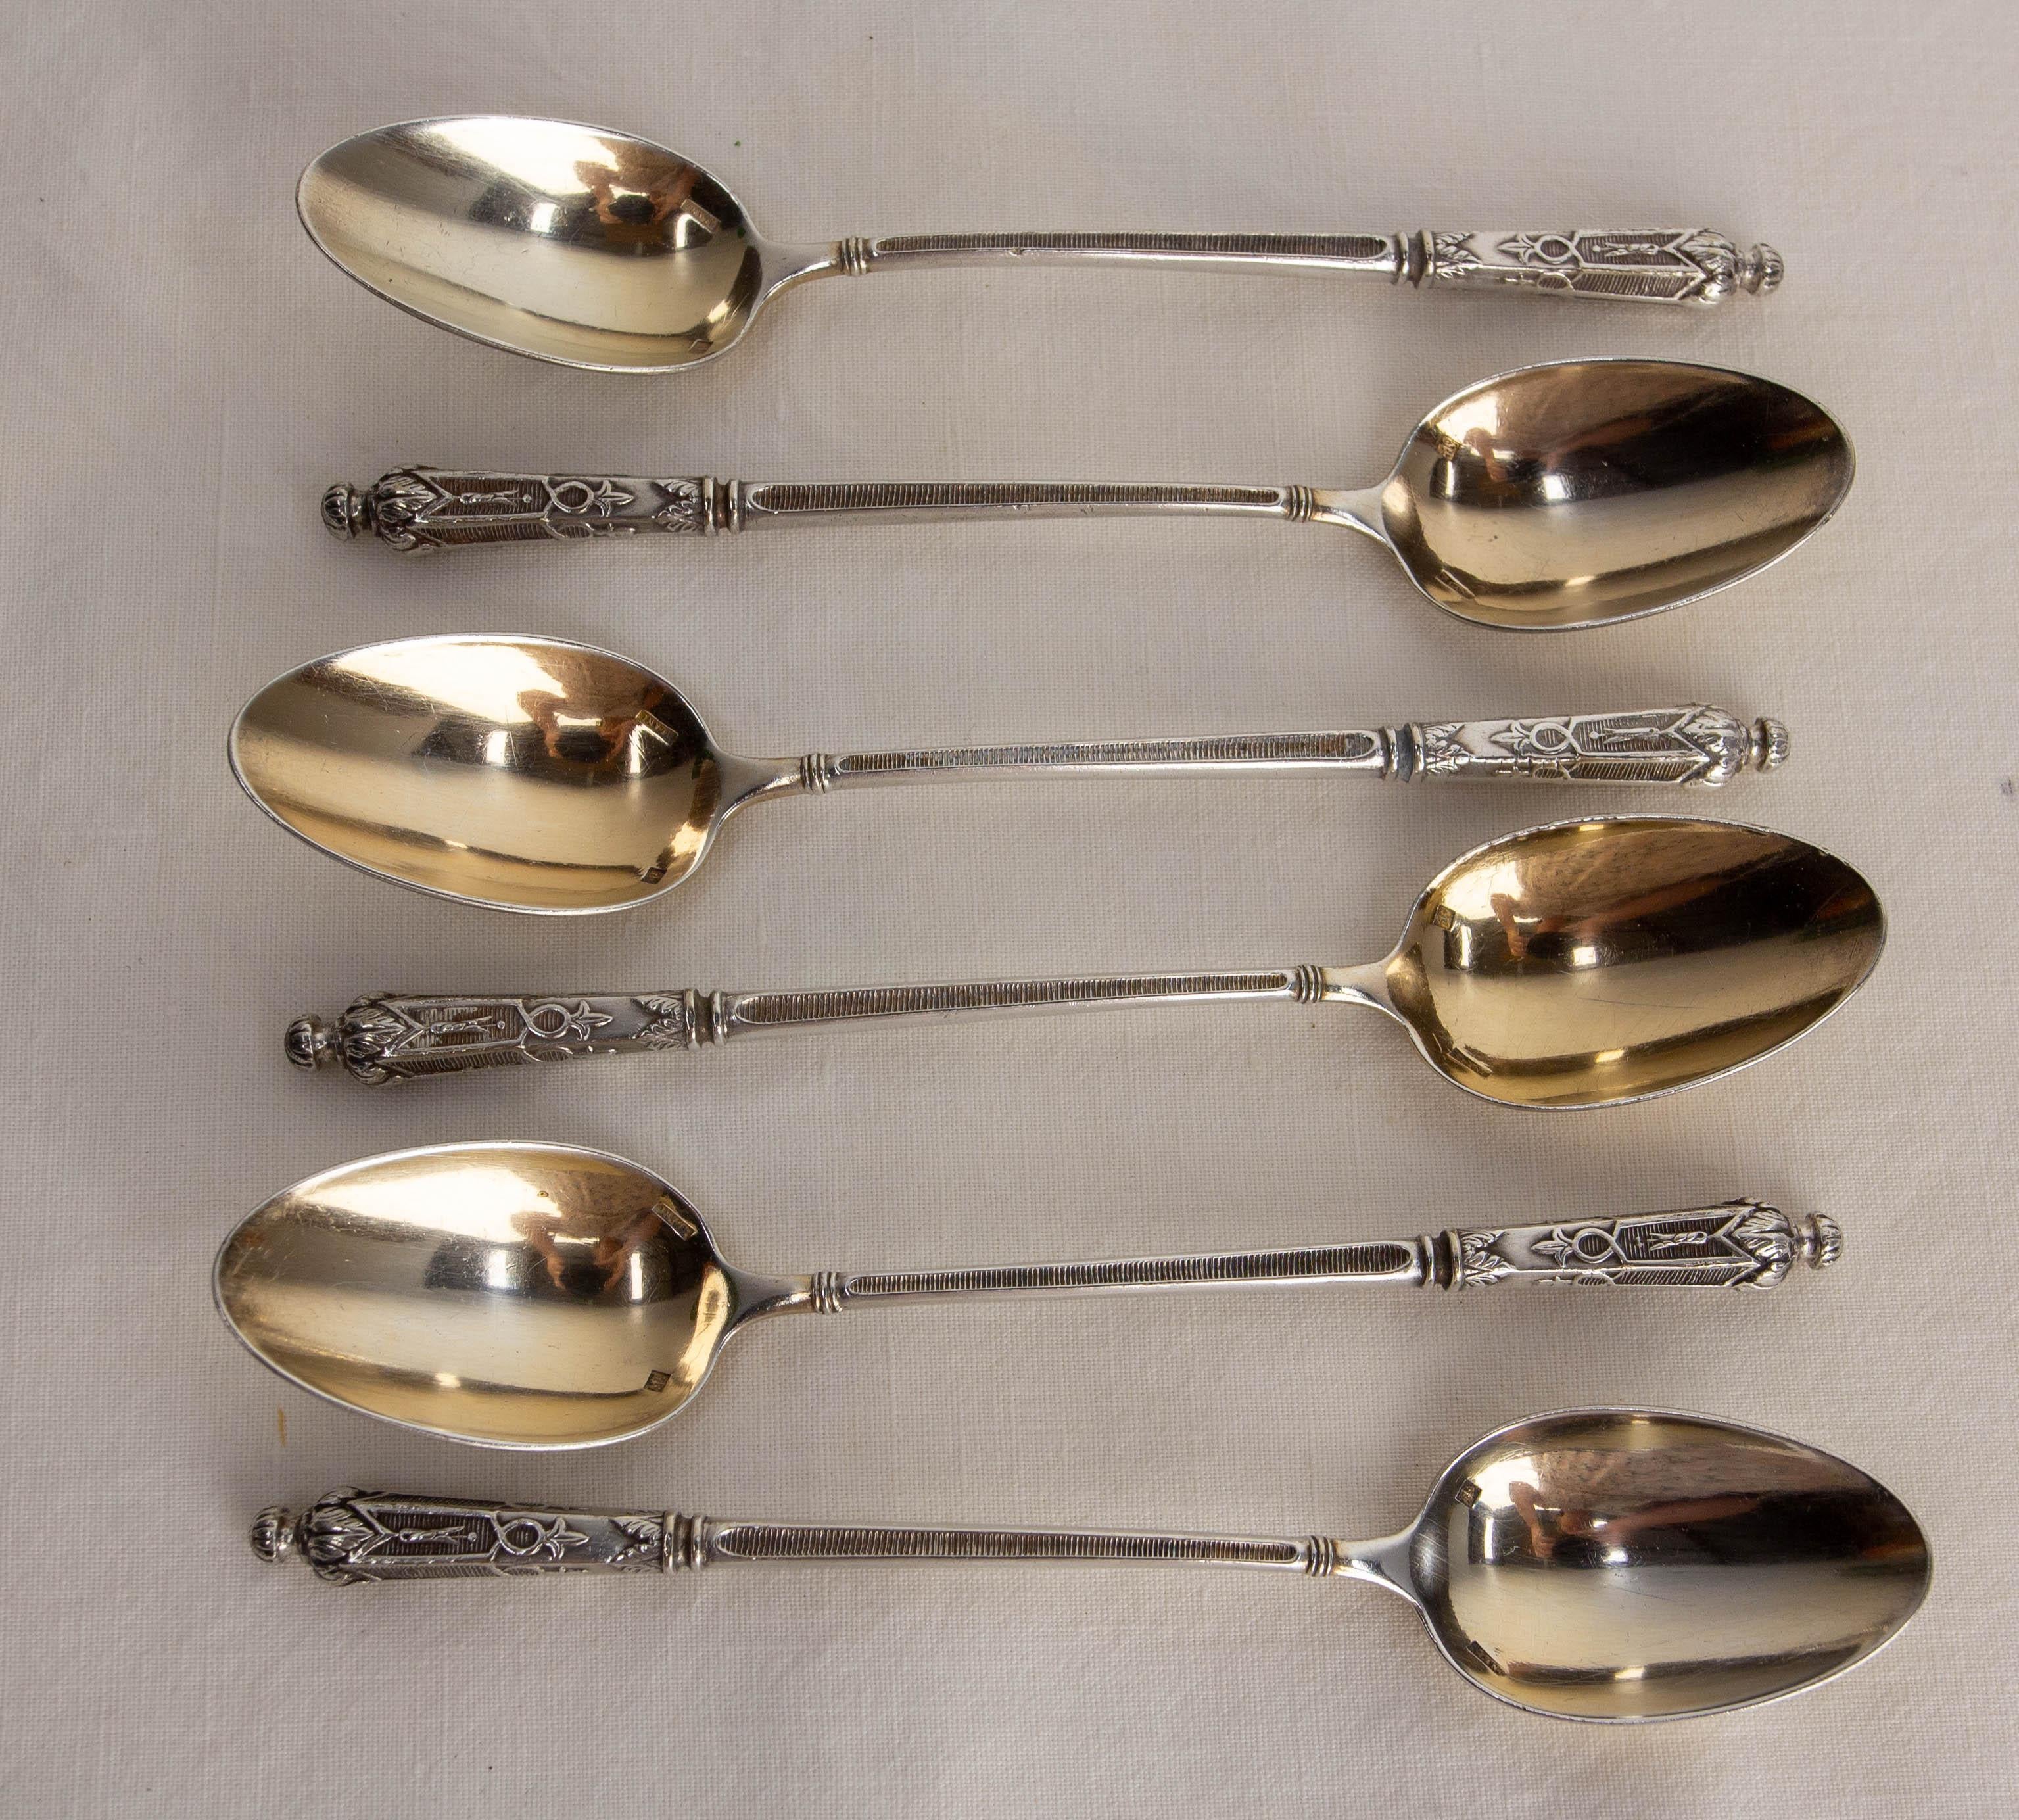 Set of six spoons of silver metal 
The handles of the spoons are carved like acanthus leaves.
these spoons are presented in their original case and were made by a French jeweler.
Good condition

Shipping:
11 / 16.5 / 4.5 cm 0.3 kg
  